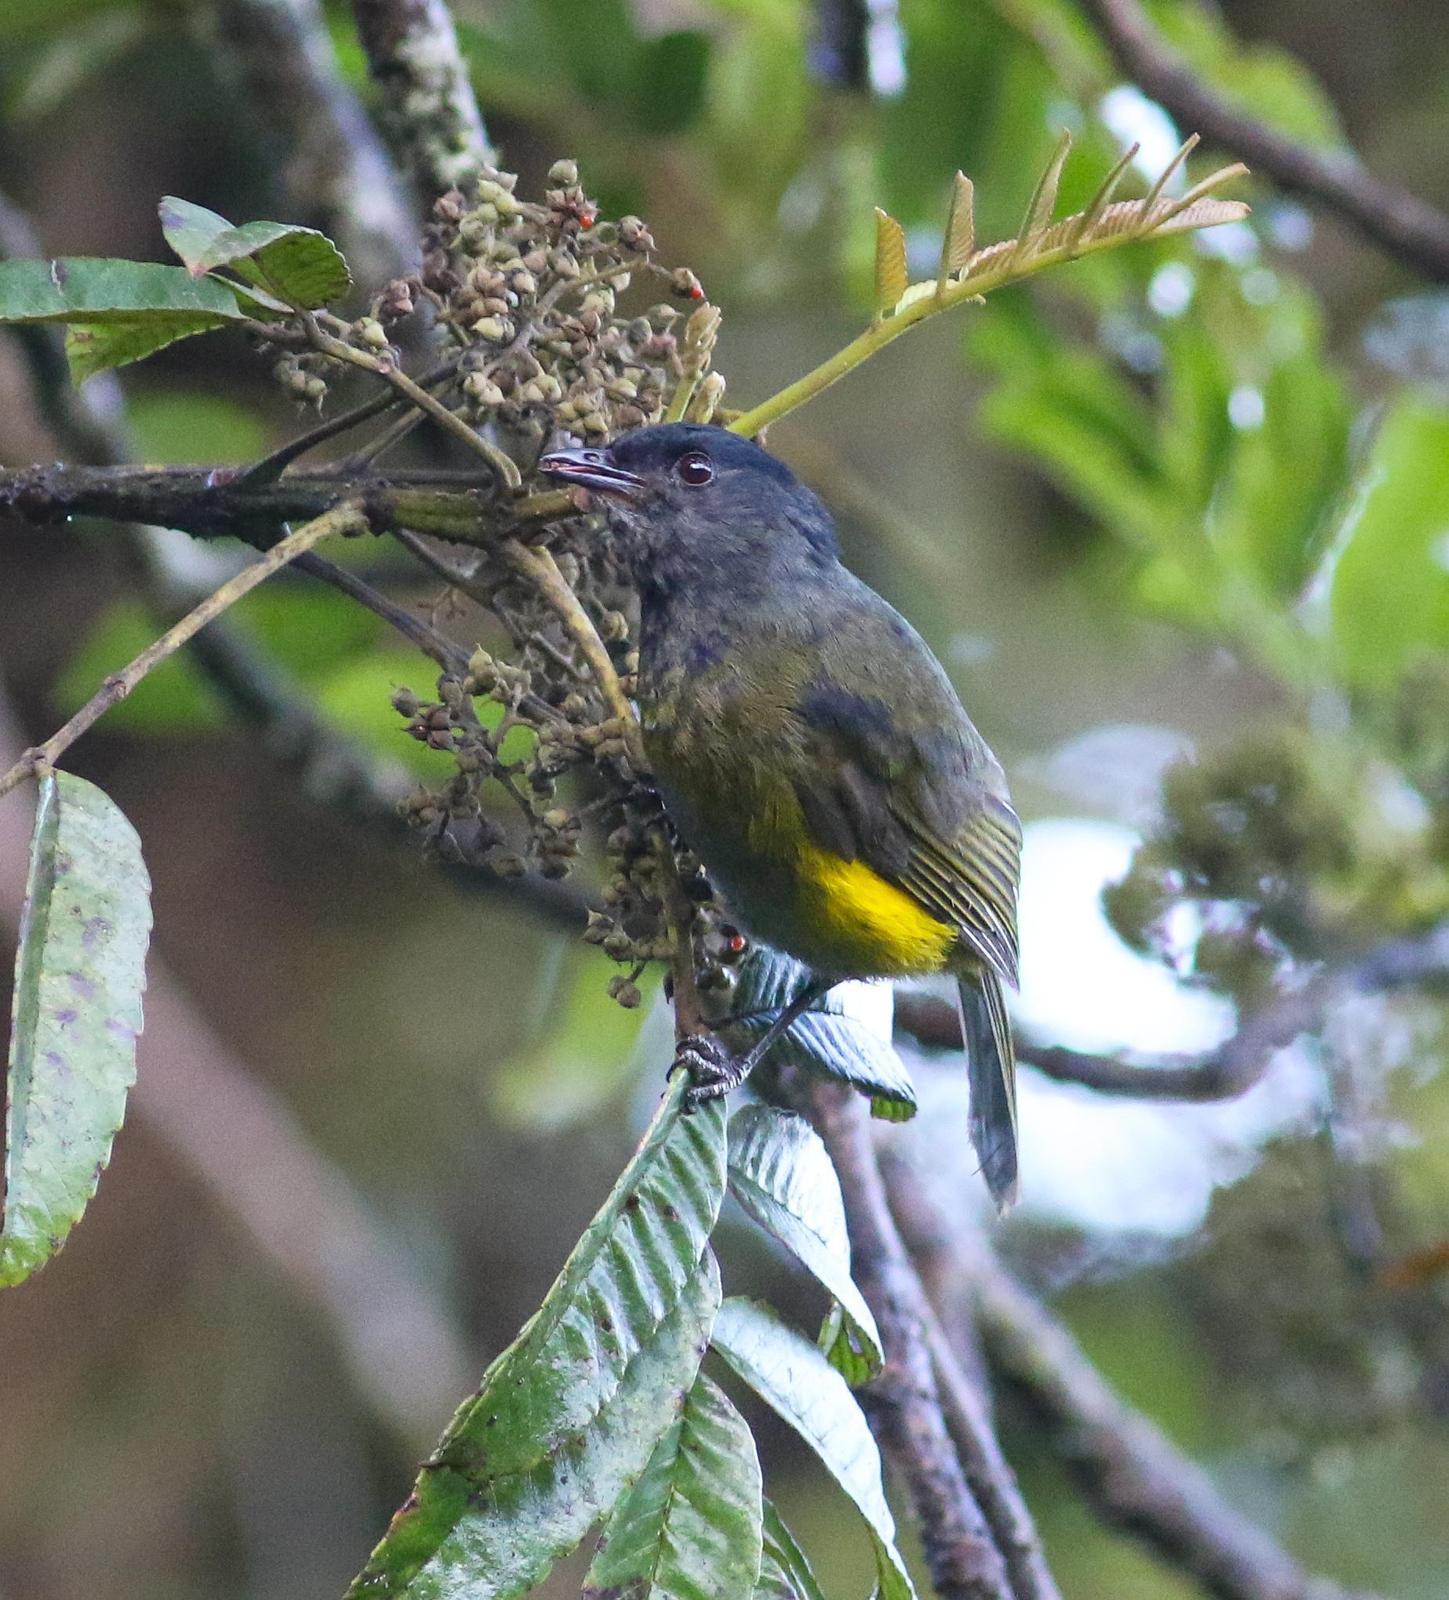 Black-and-yellow Silky-flycatcher Photo by Leonardo Garrigues